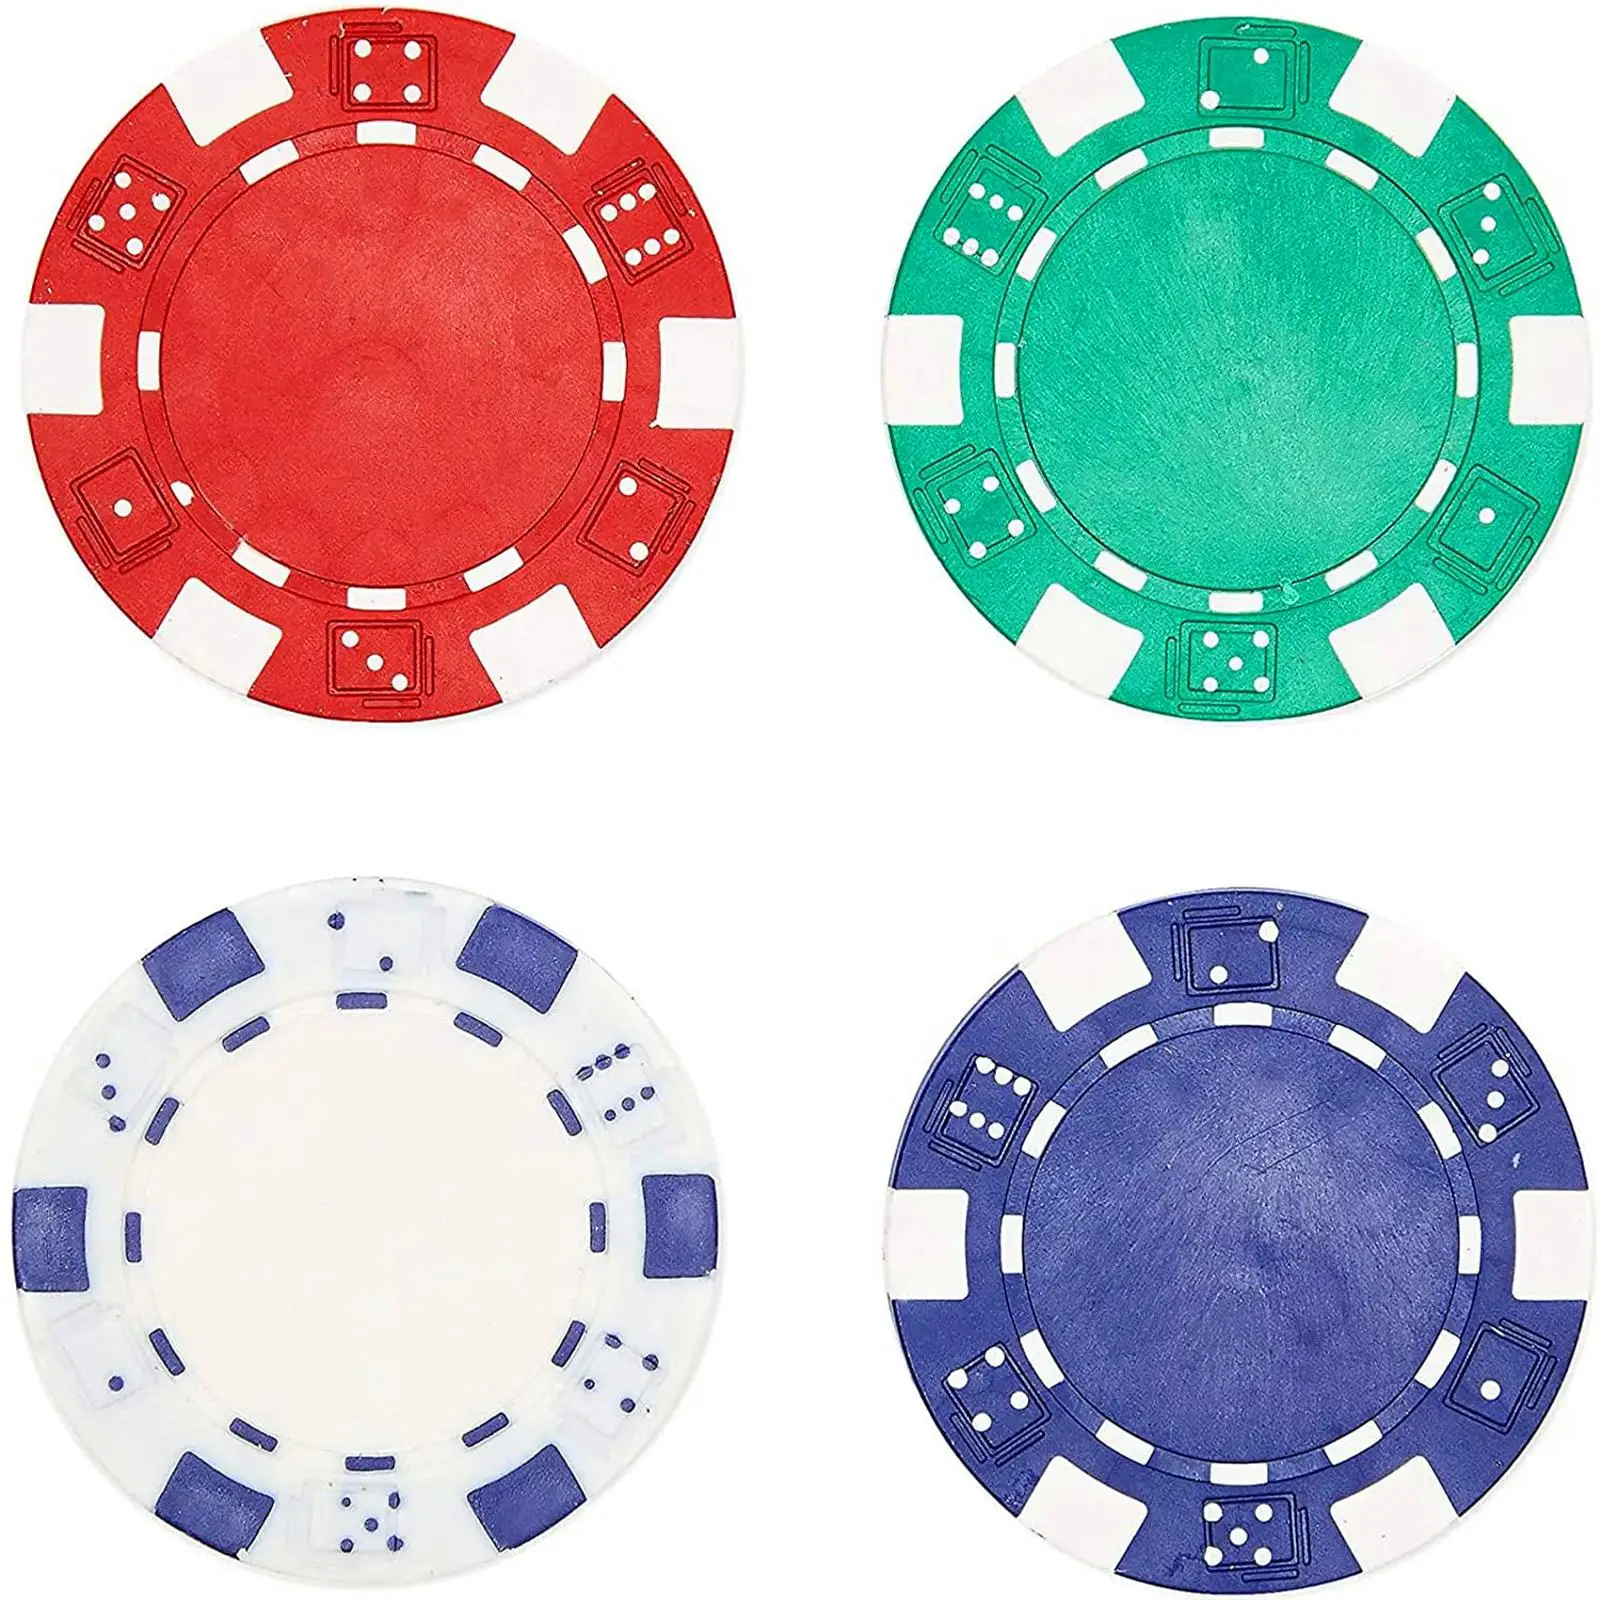 100 Pieces Poker Chips Game Tokens Bingo Chips Markers for Party Activities